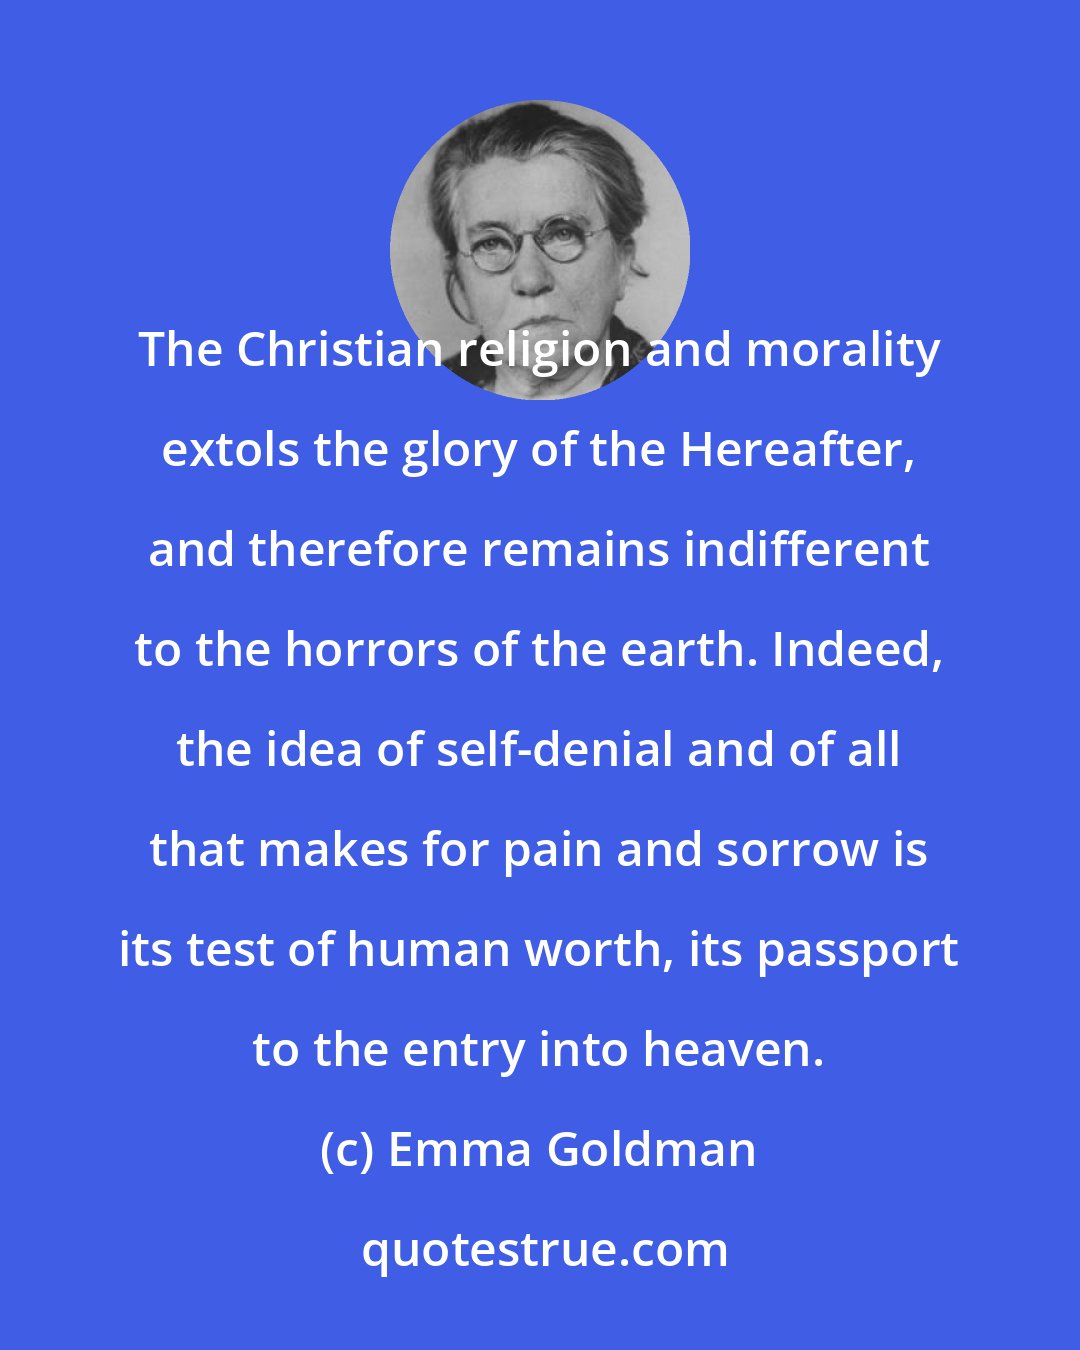 Emma Goldman: The Christian religion and morality extols the glory of the Hereafter, and therefore remains indifferent to the horrors of the earth. Indeed, the idea of self-denial and of all that makes for pain and sorrow is its test of human worth, its passport to the entry into heaven.